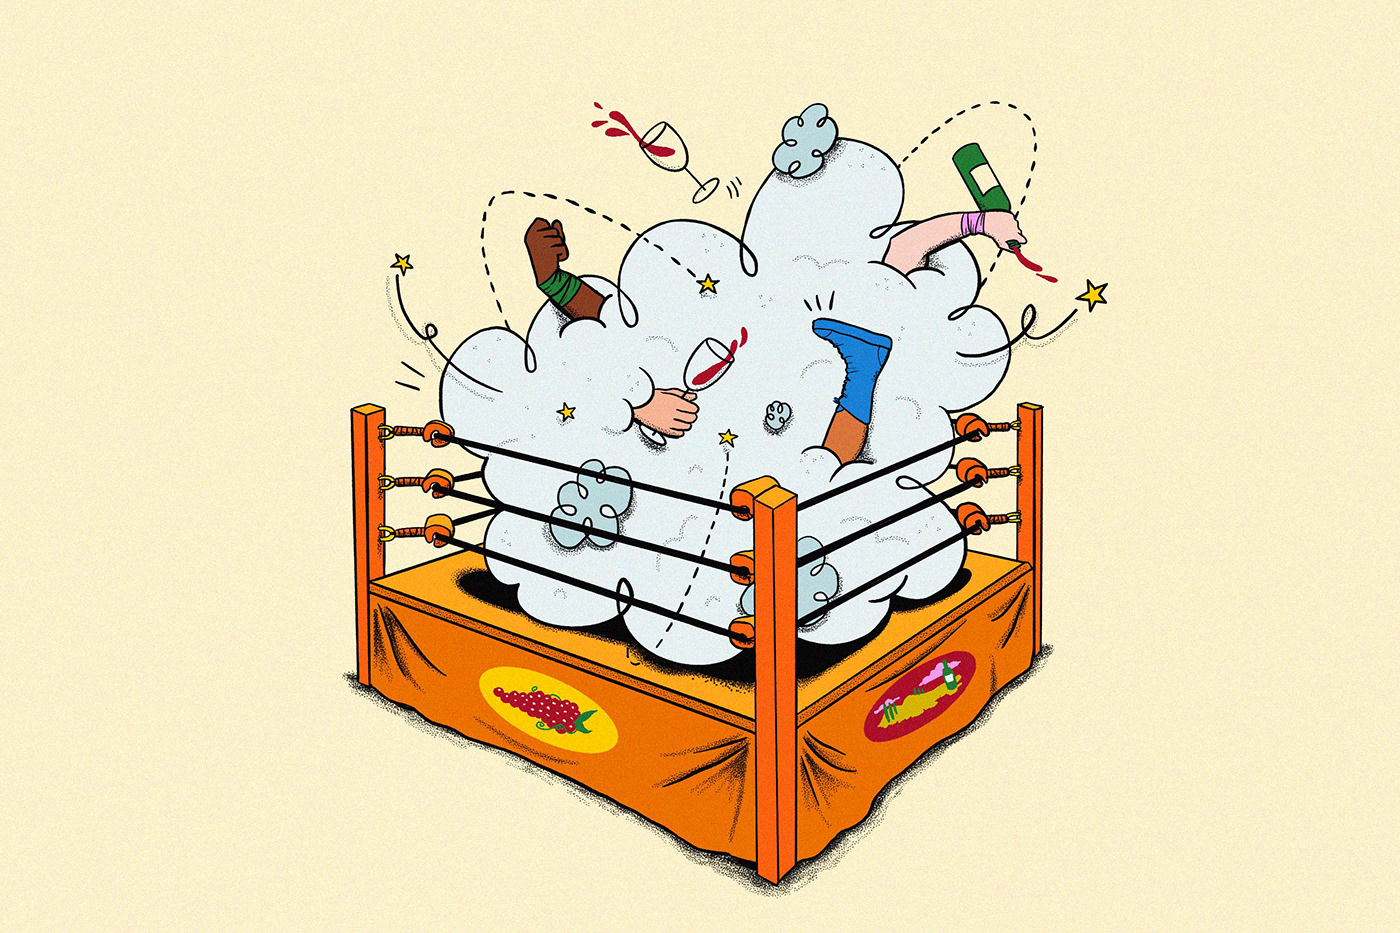 A cartoonish scuffle in a wrestling ring, using wine glasses and bottles as weapons.